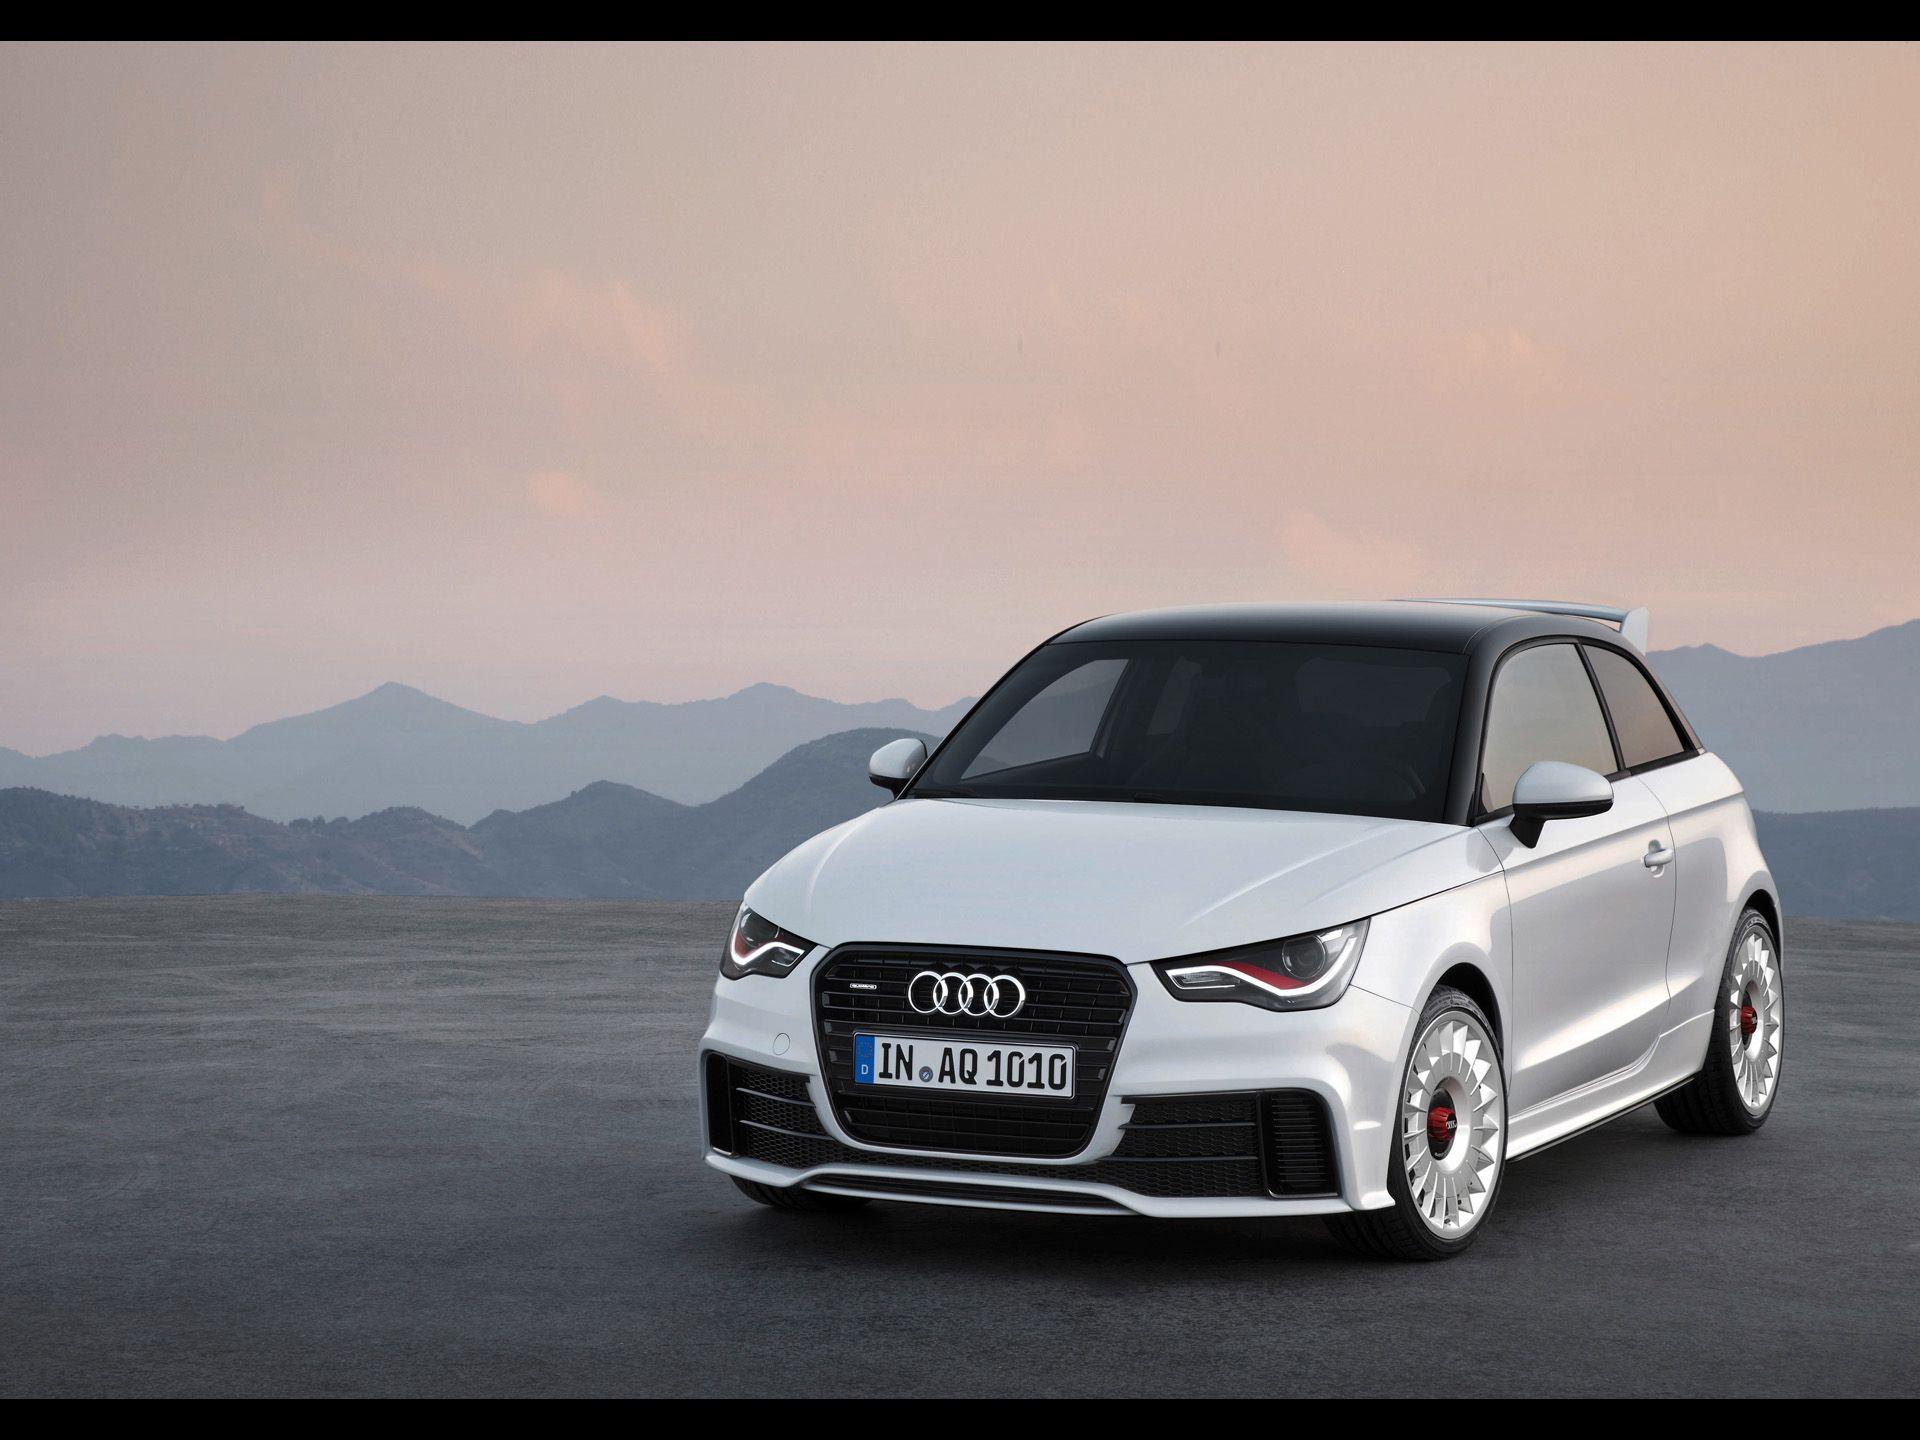 Audi A1 Wallpapers Group